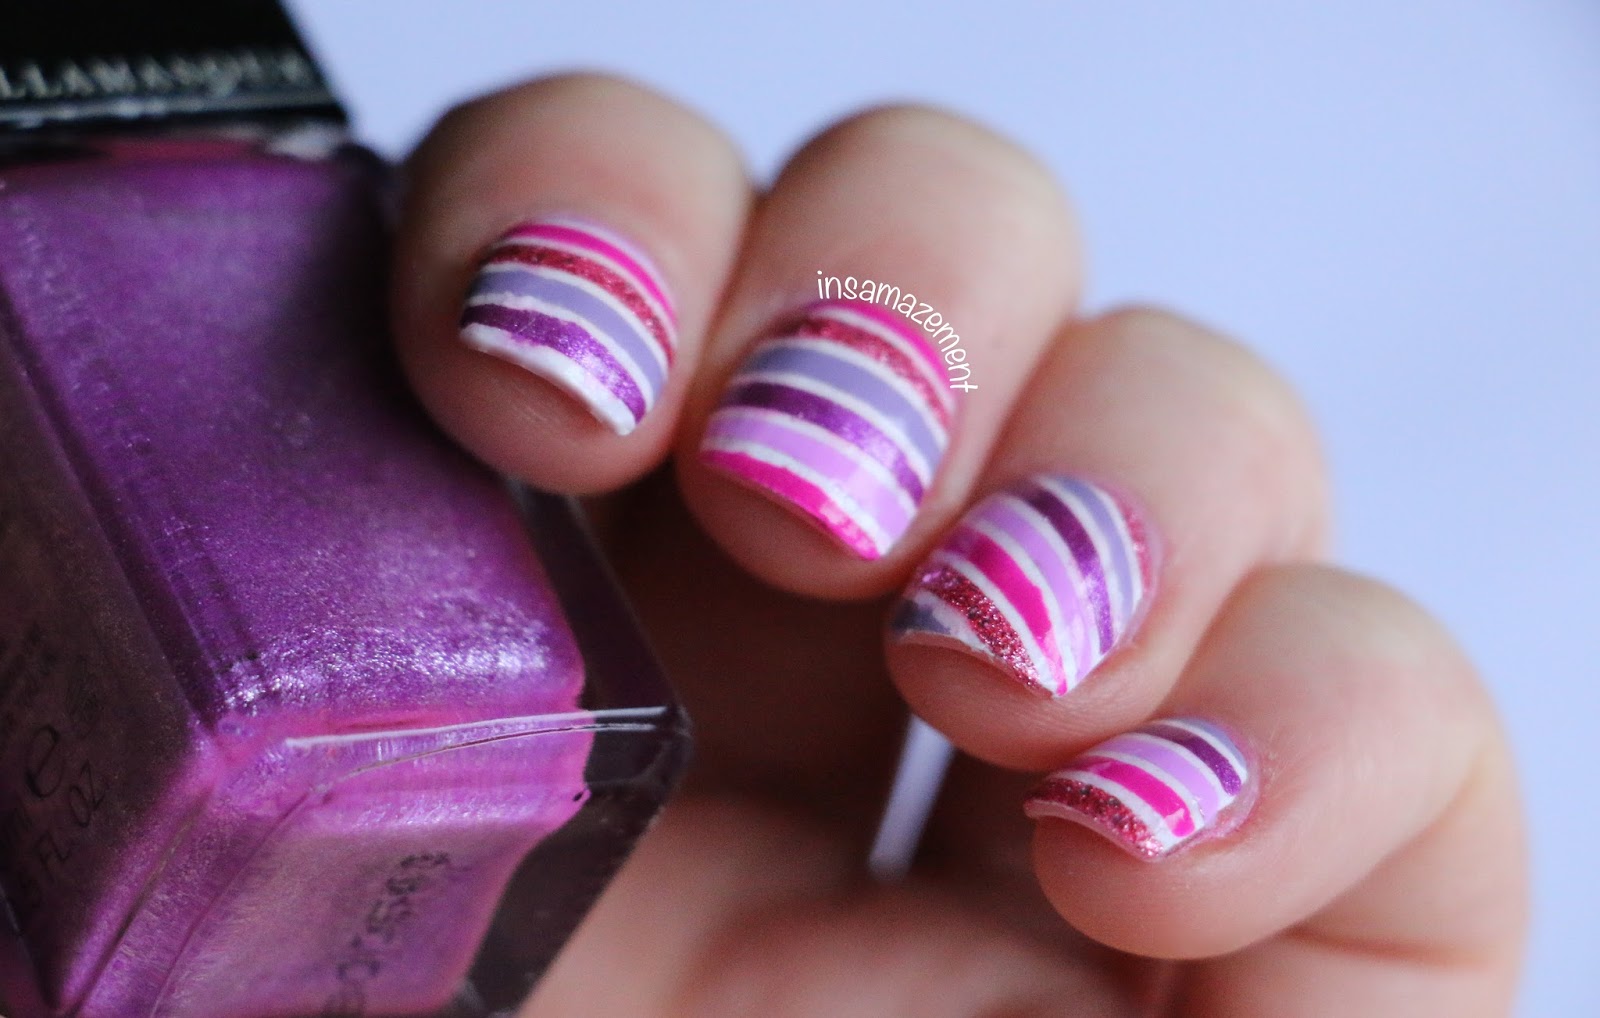 3. "Colorful Striped Nail Designs for Summer" - wide 7